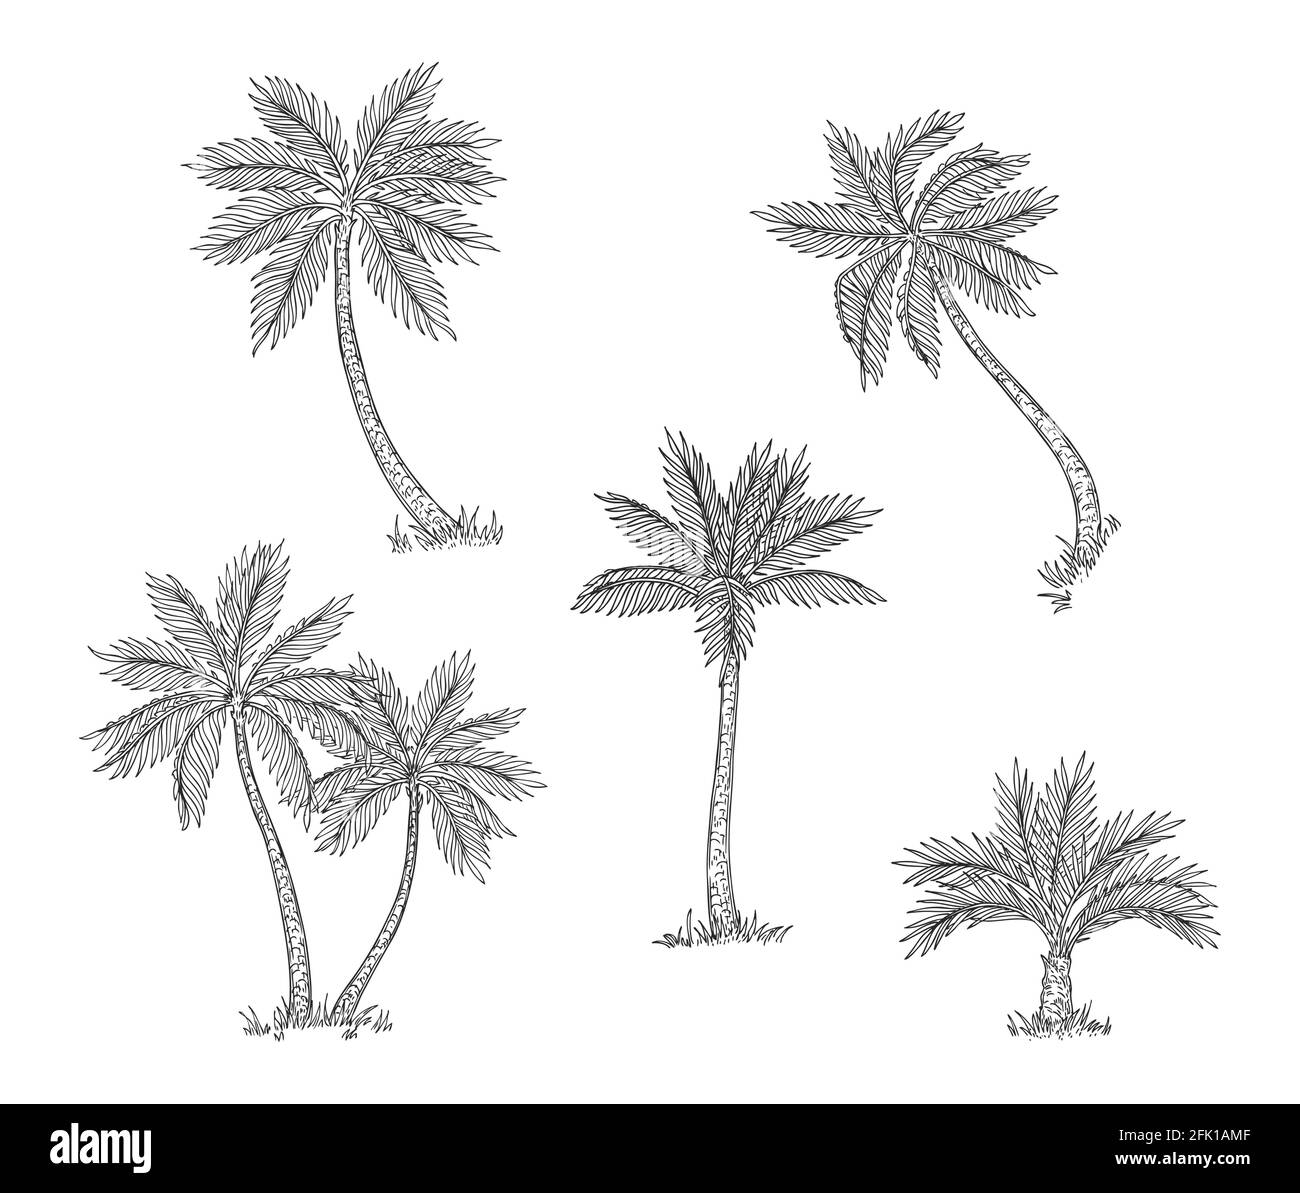 Palm trees sketch. Isolated exotic rainforest, coconut tree. Coast or beach hand drawn flora, black engraving botanical vector elements Stock Vector